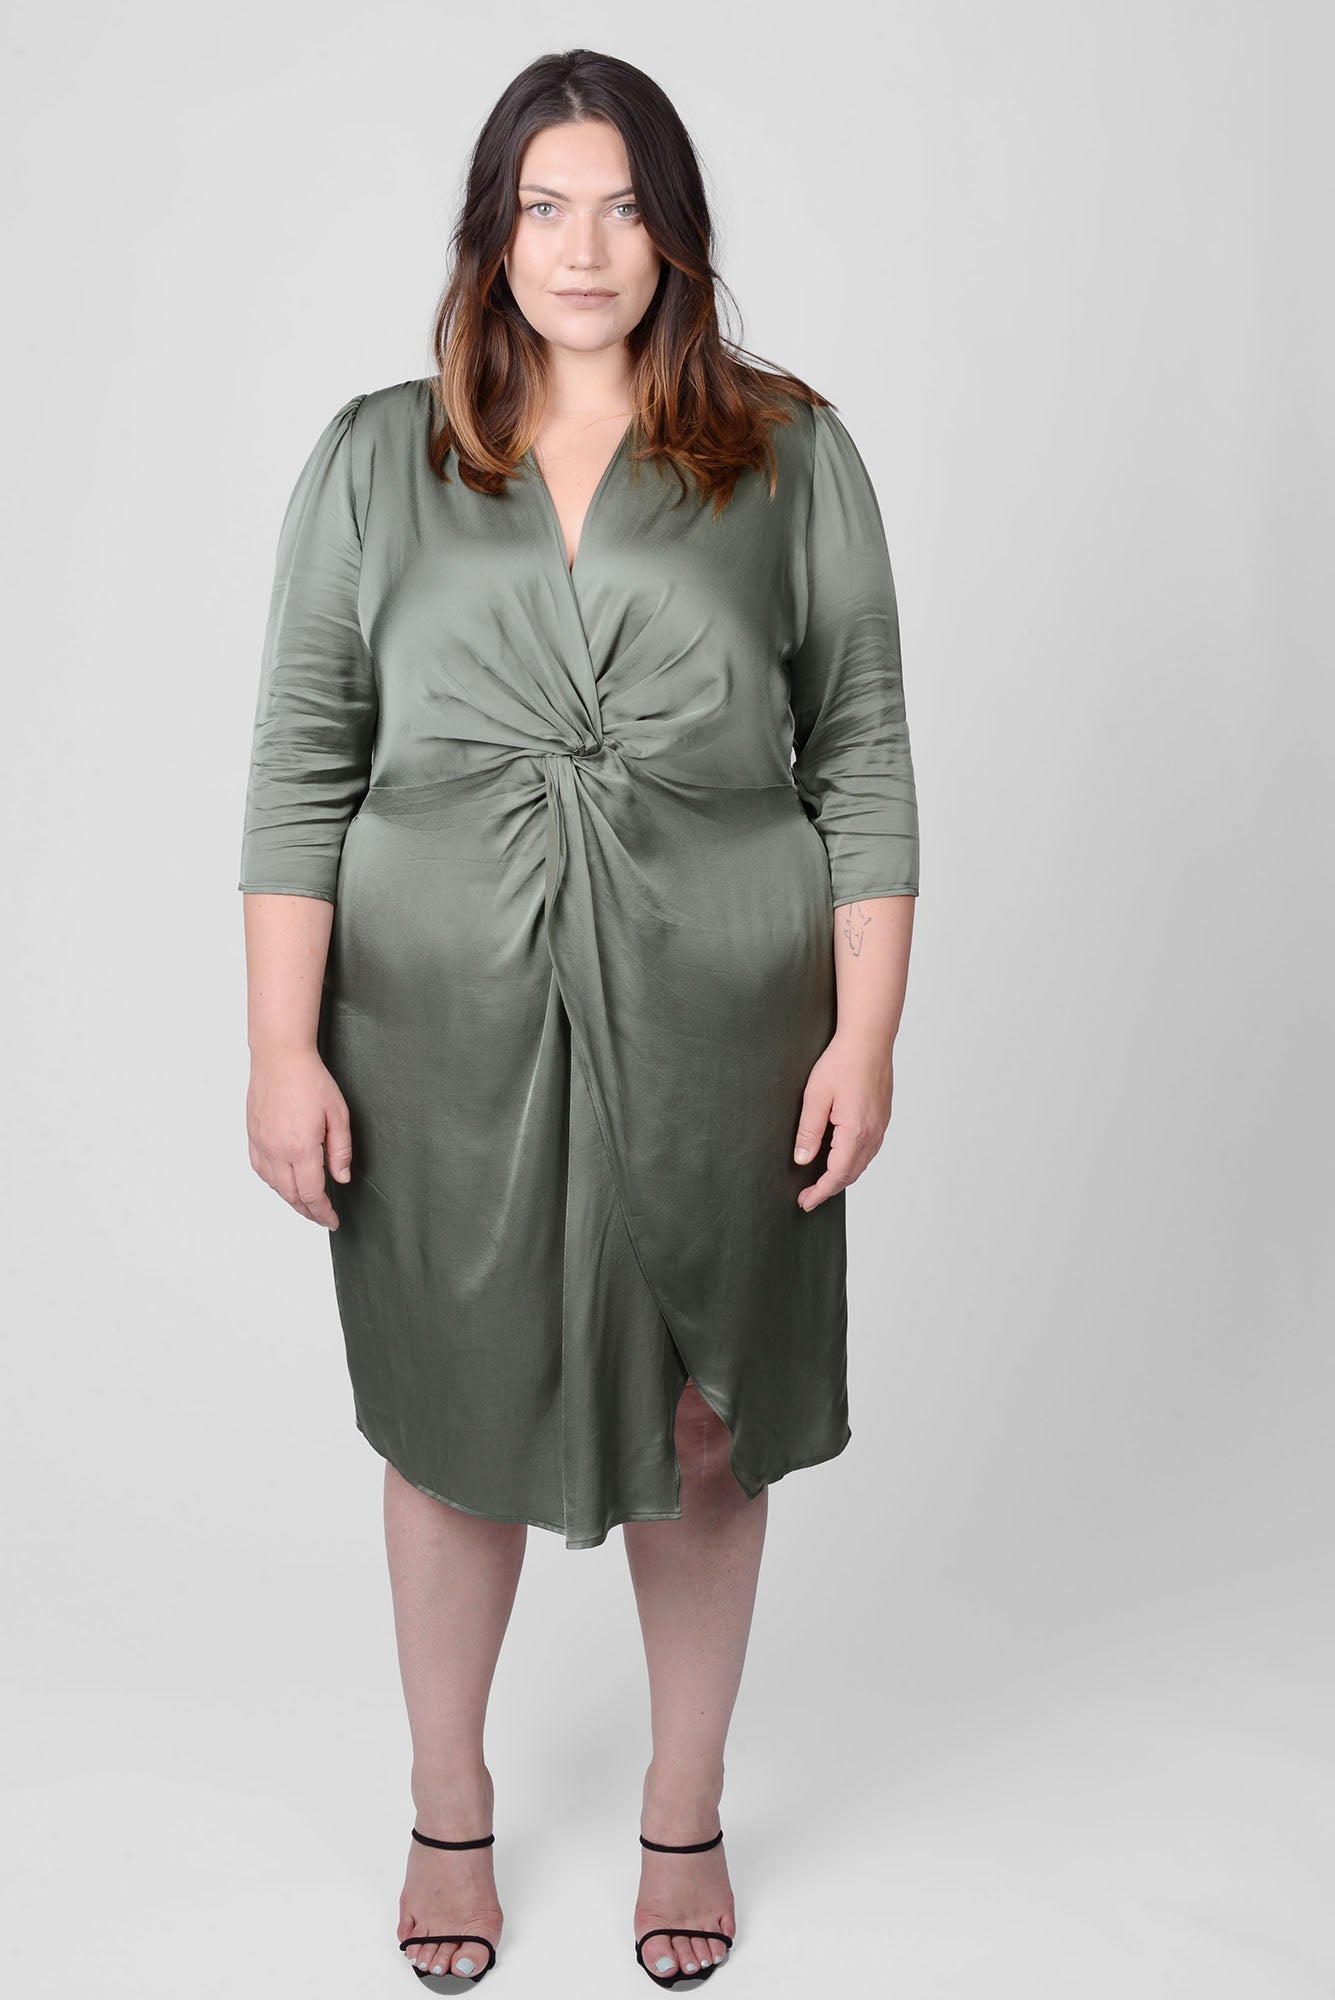 Mayes NYC Elvie Knot Waist Cut Away Dress in Olice color worn by model Megan Smith